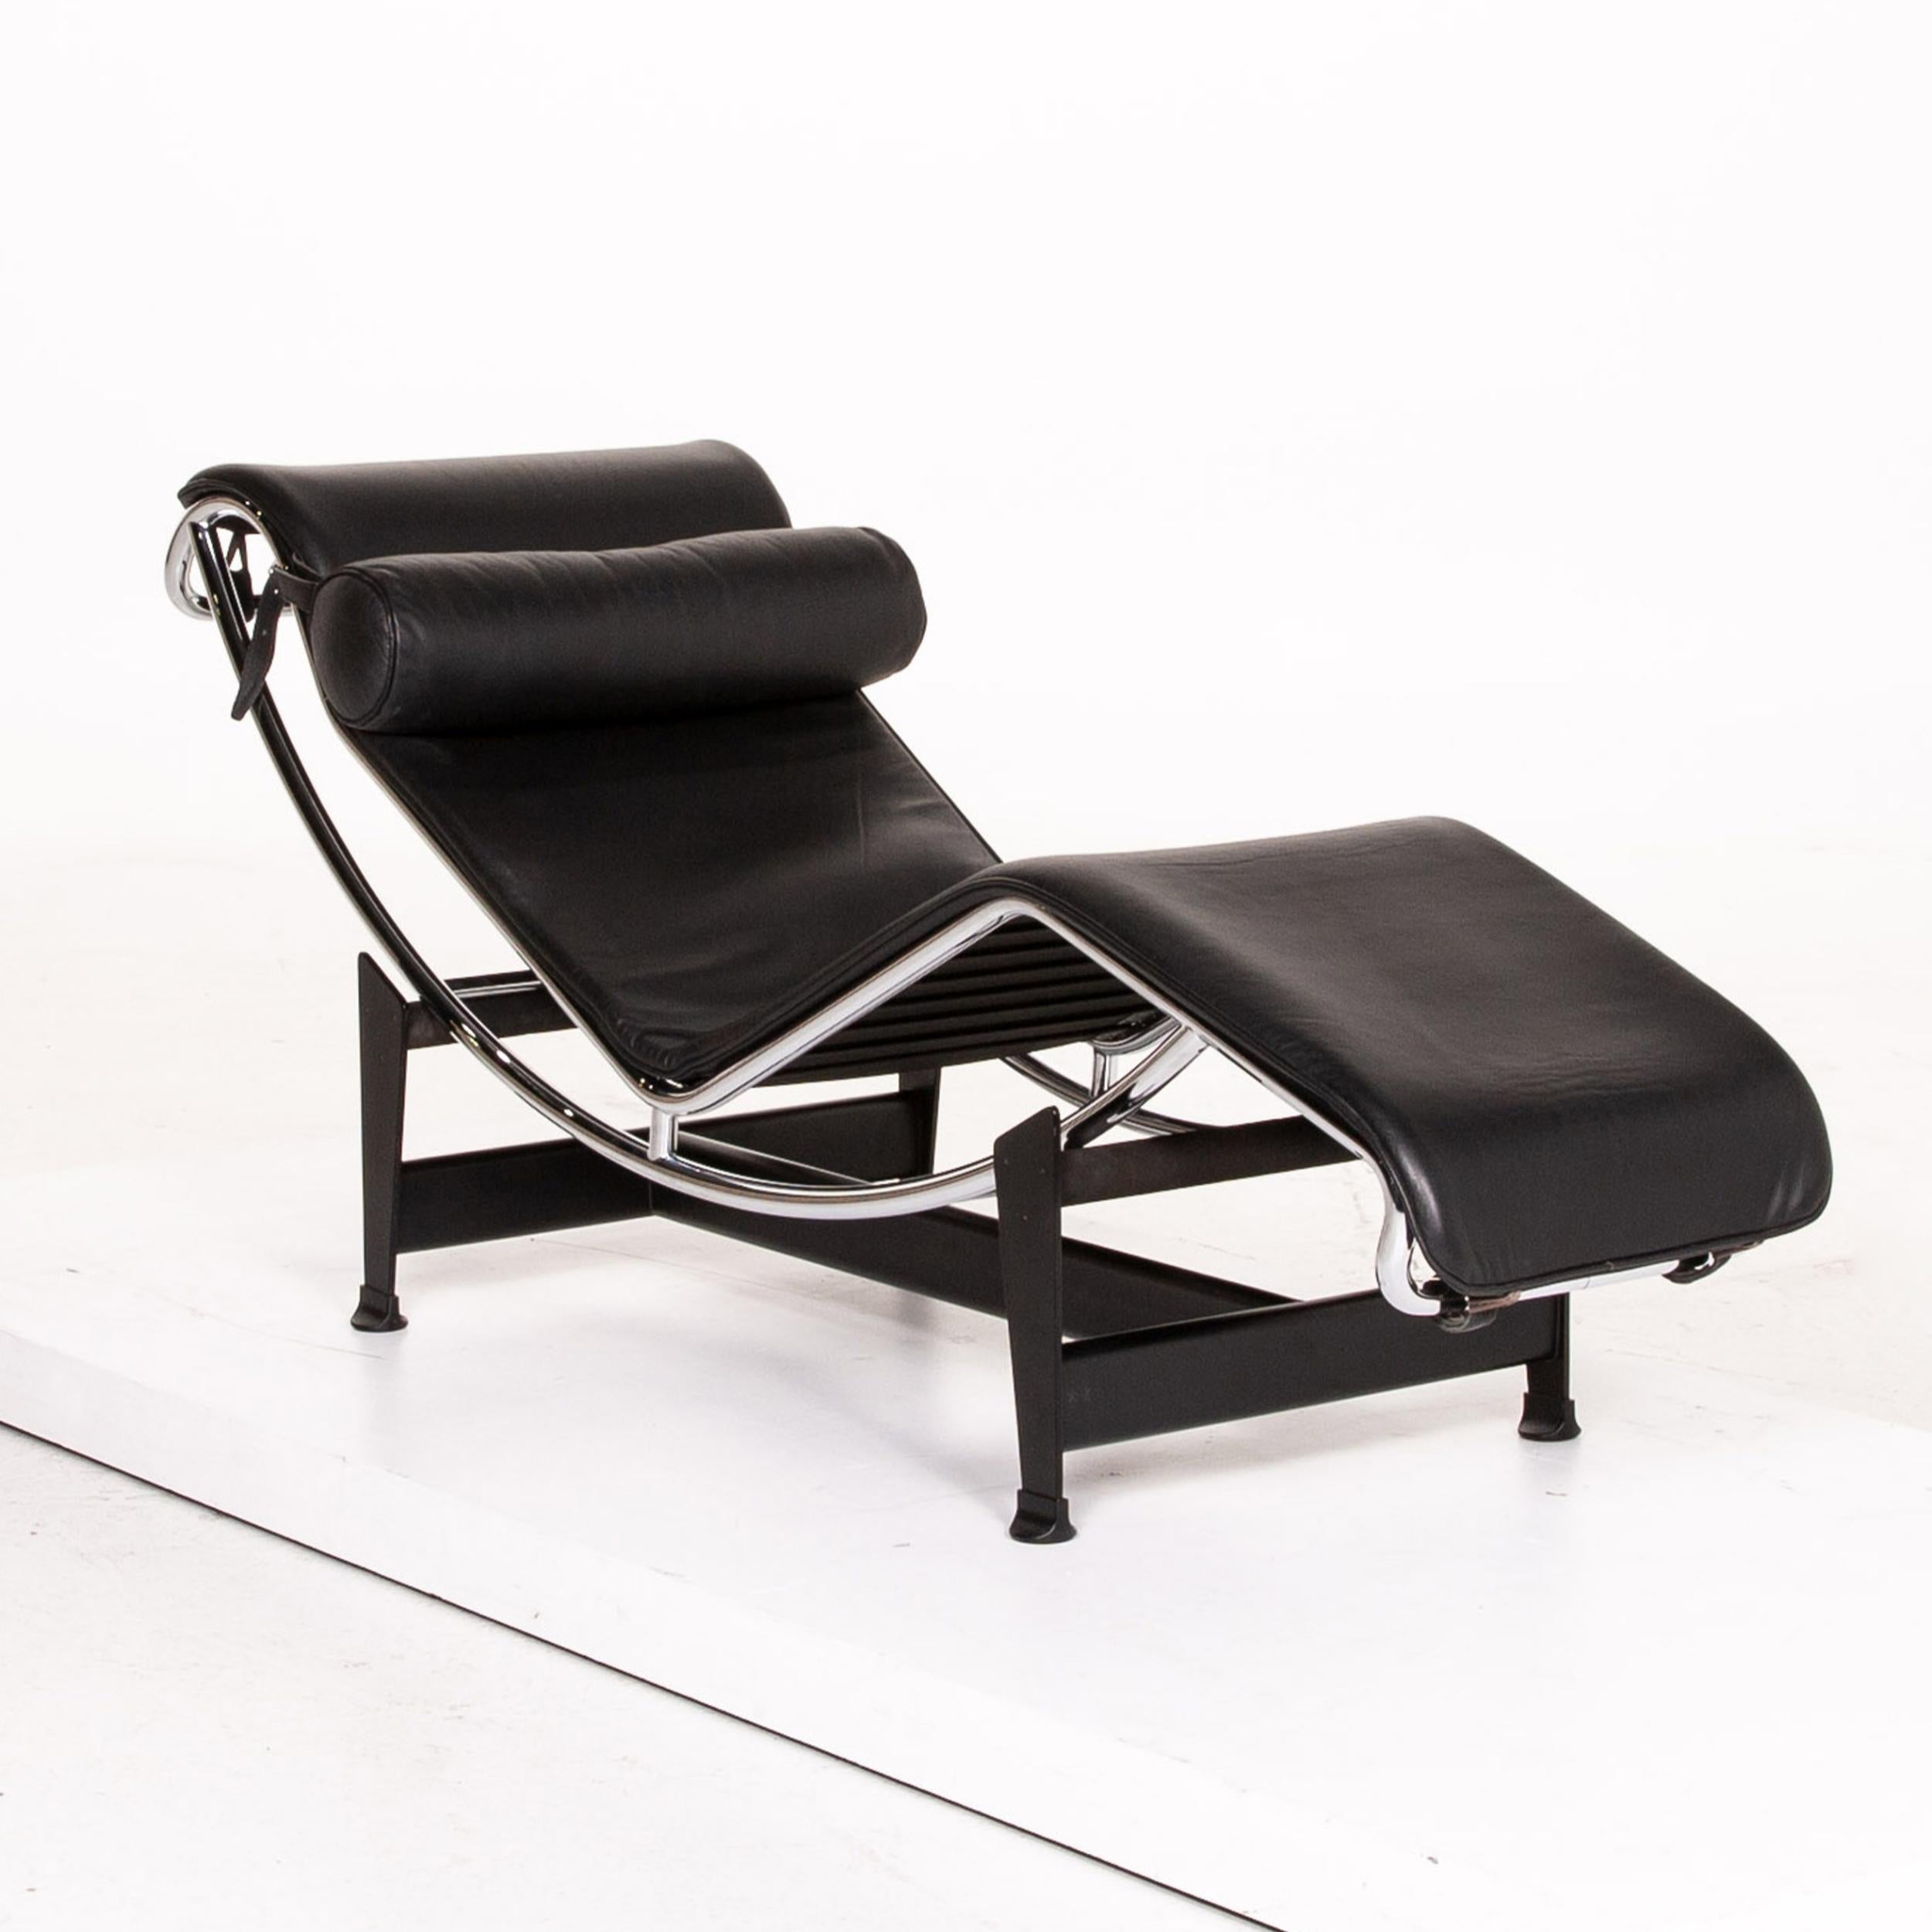 Cassina Le Corbusier LC 4 Leather Lounger Black Function Relaxation Function For Sale 2